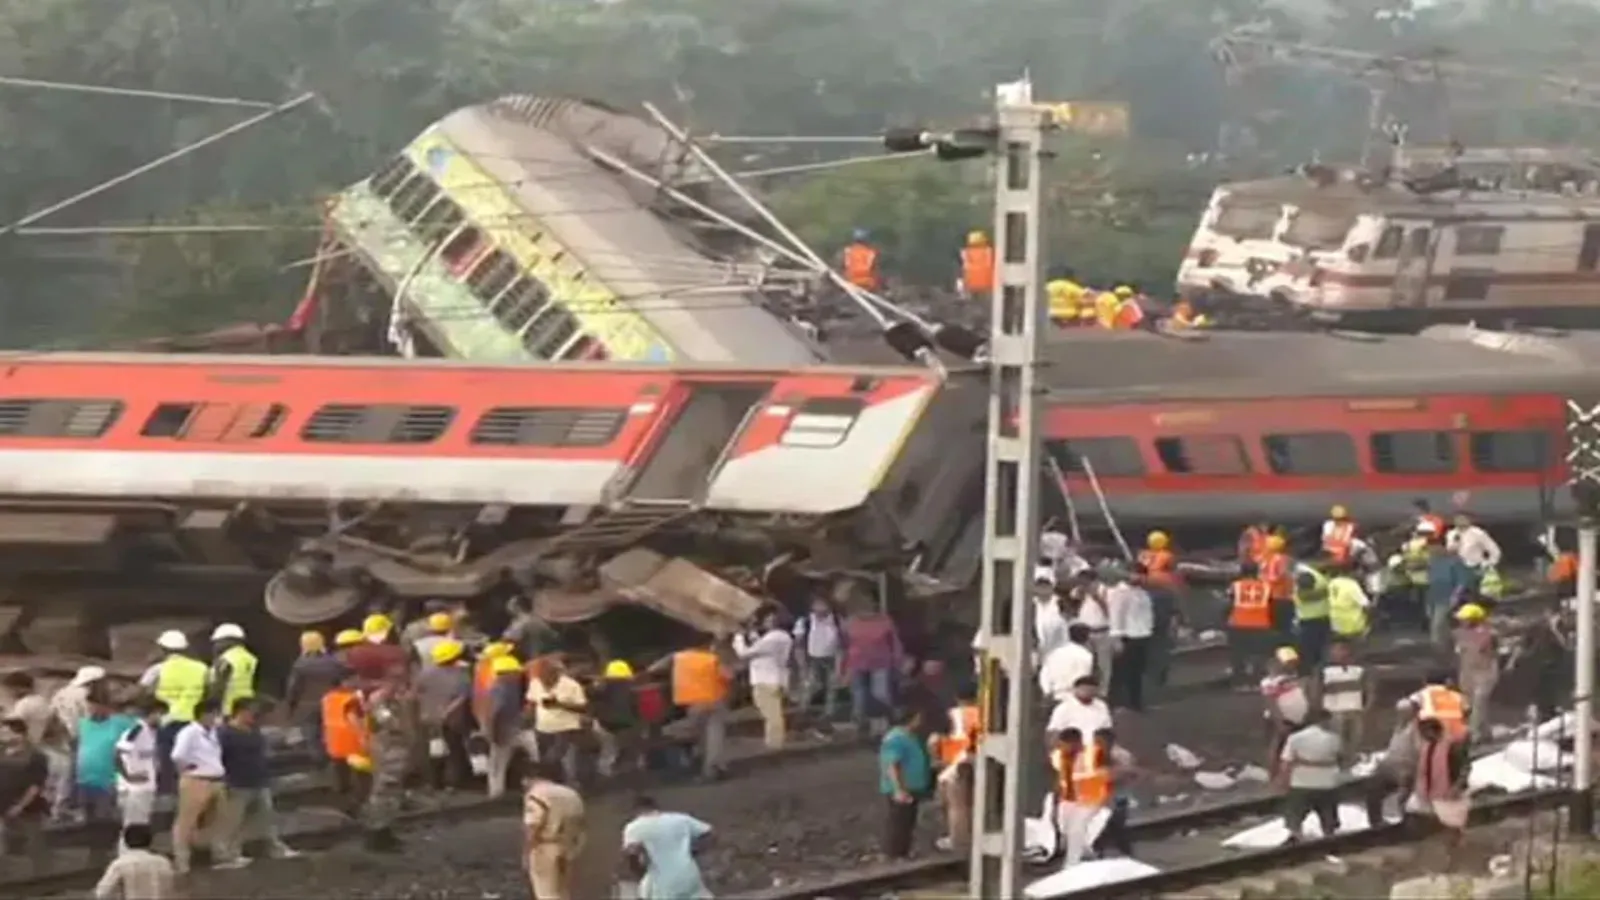 odisha train accident over 230 dead 900 injured pm announces ex gratia of rs 2 lakh to kin of deceased